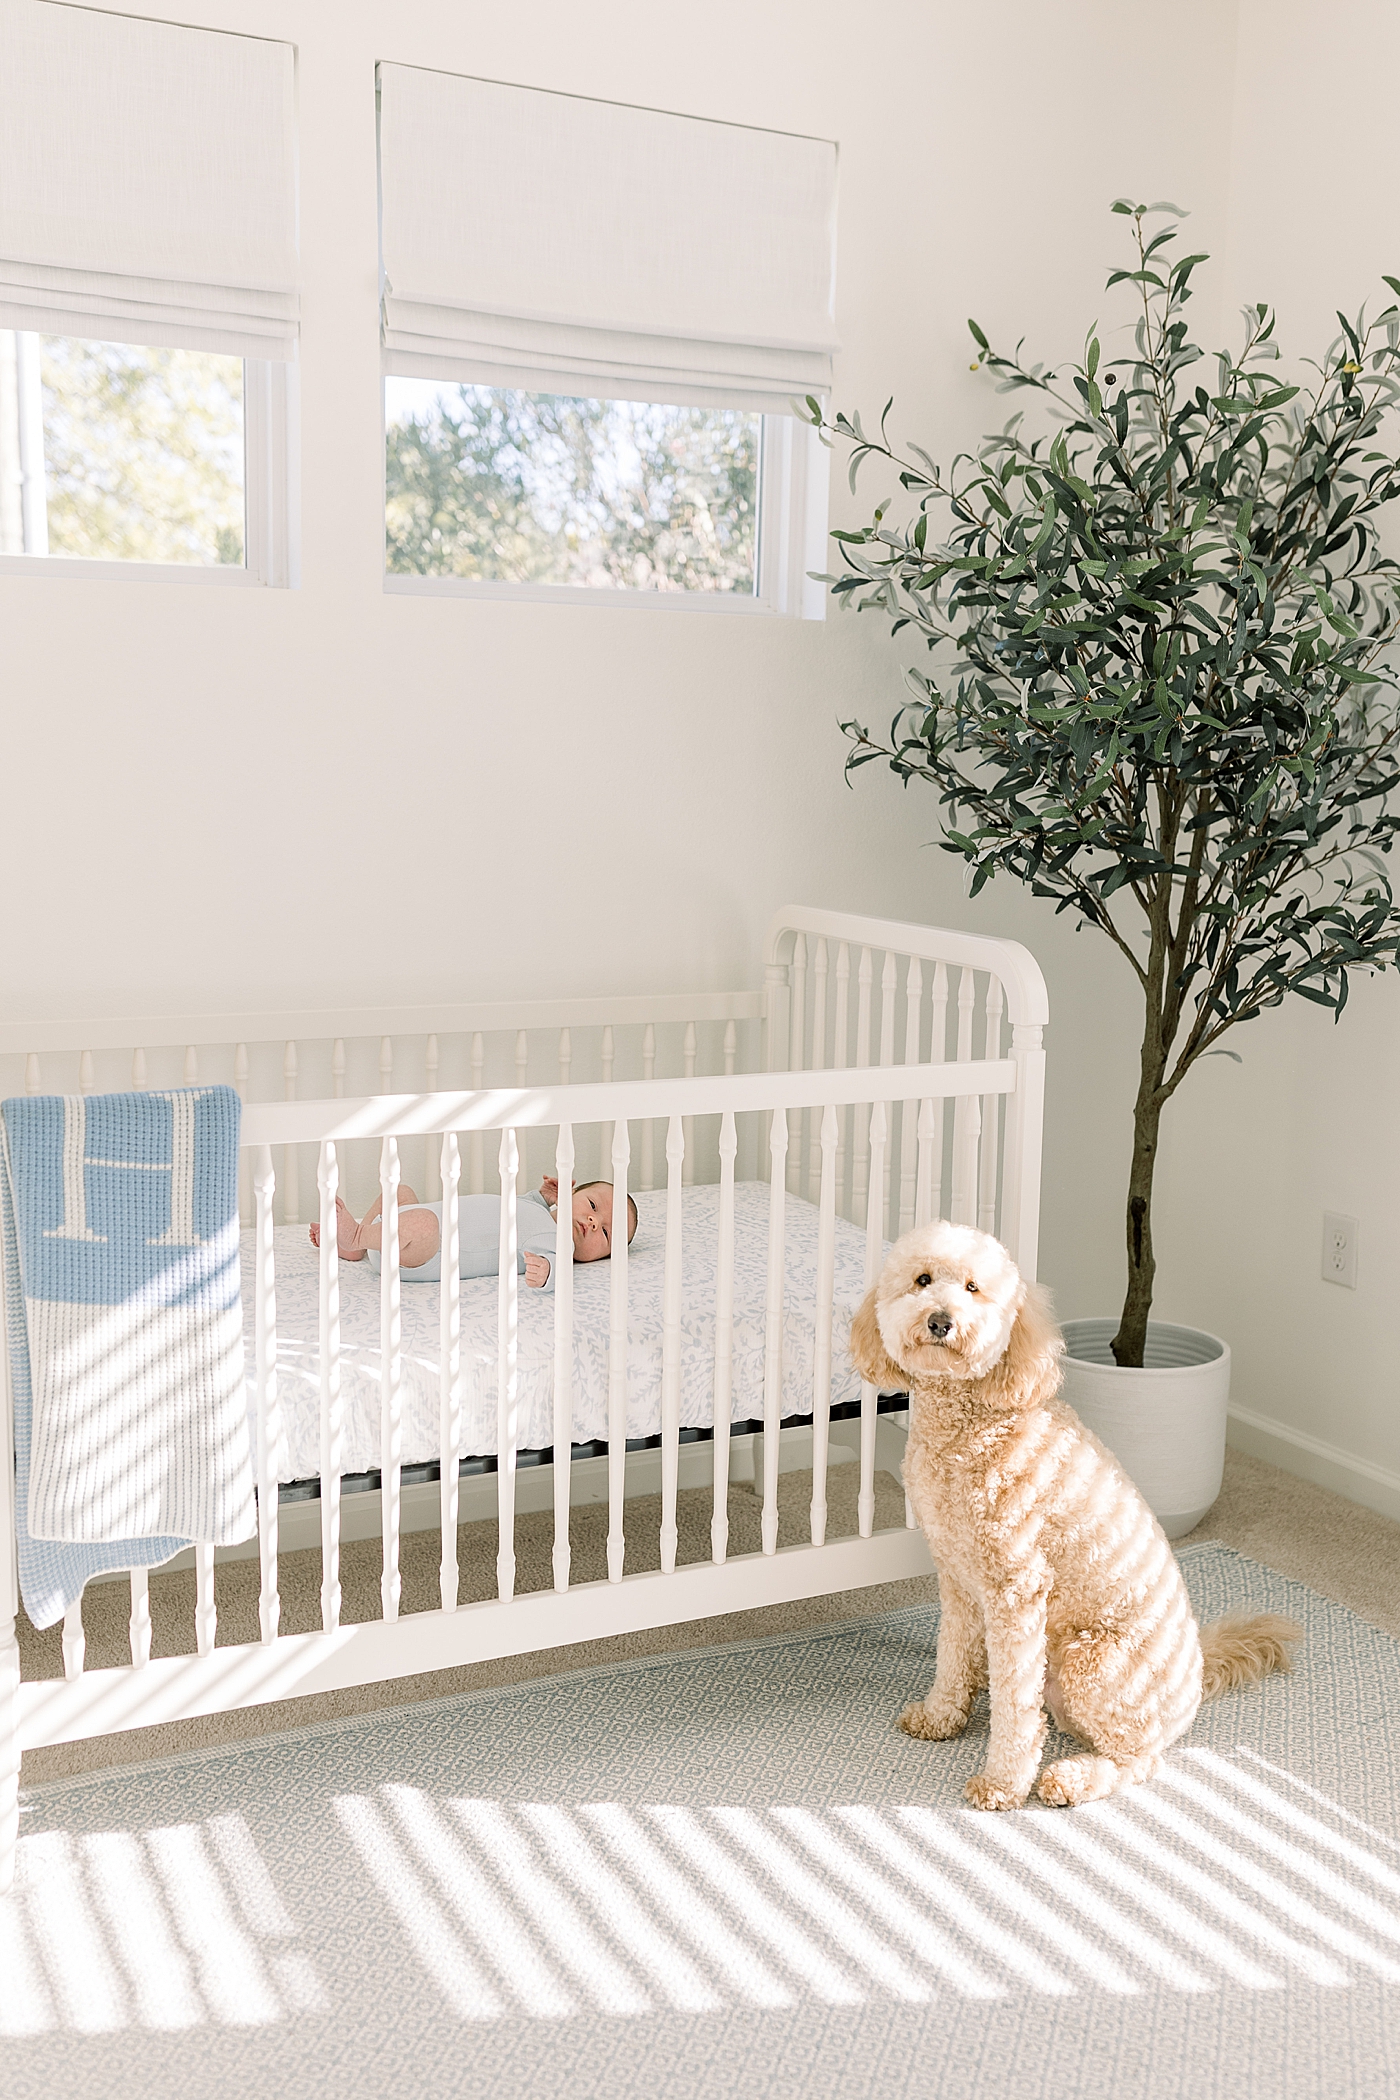 Baby in a white baby crib and dog beside the crib during baby boy newborn session | Image by Caitlyn Motycka Photography